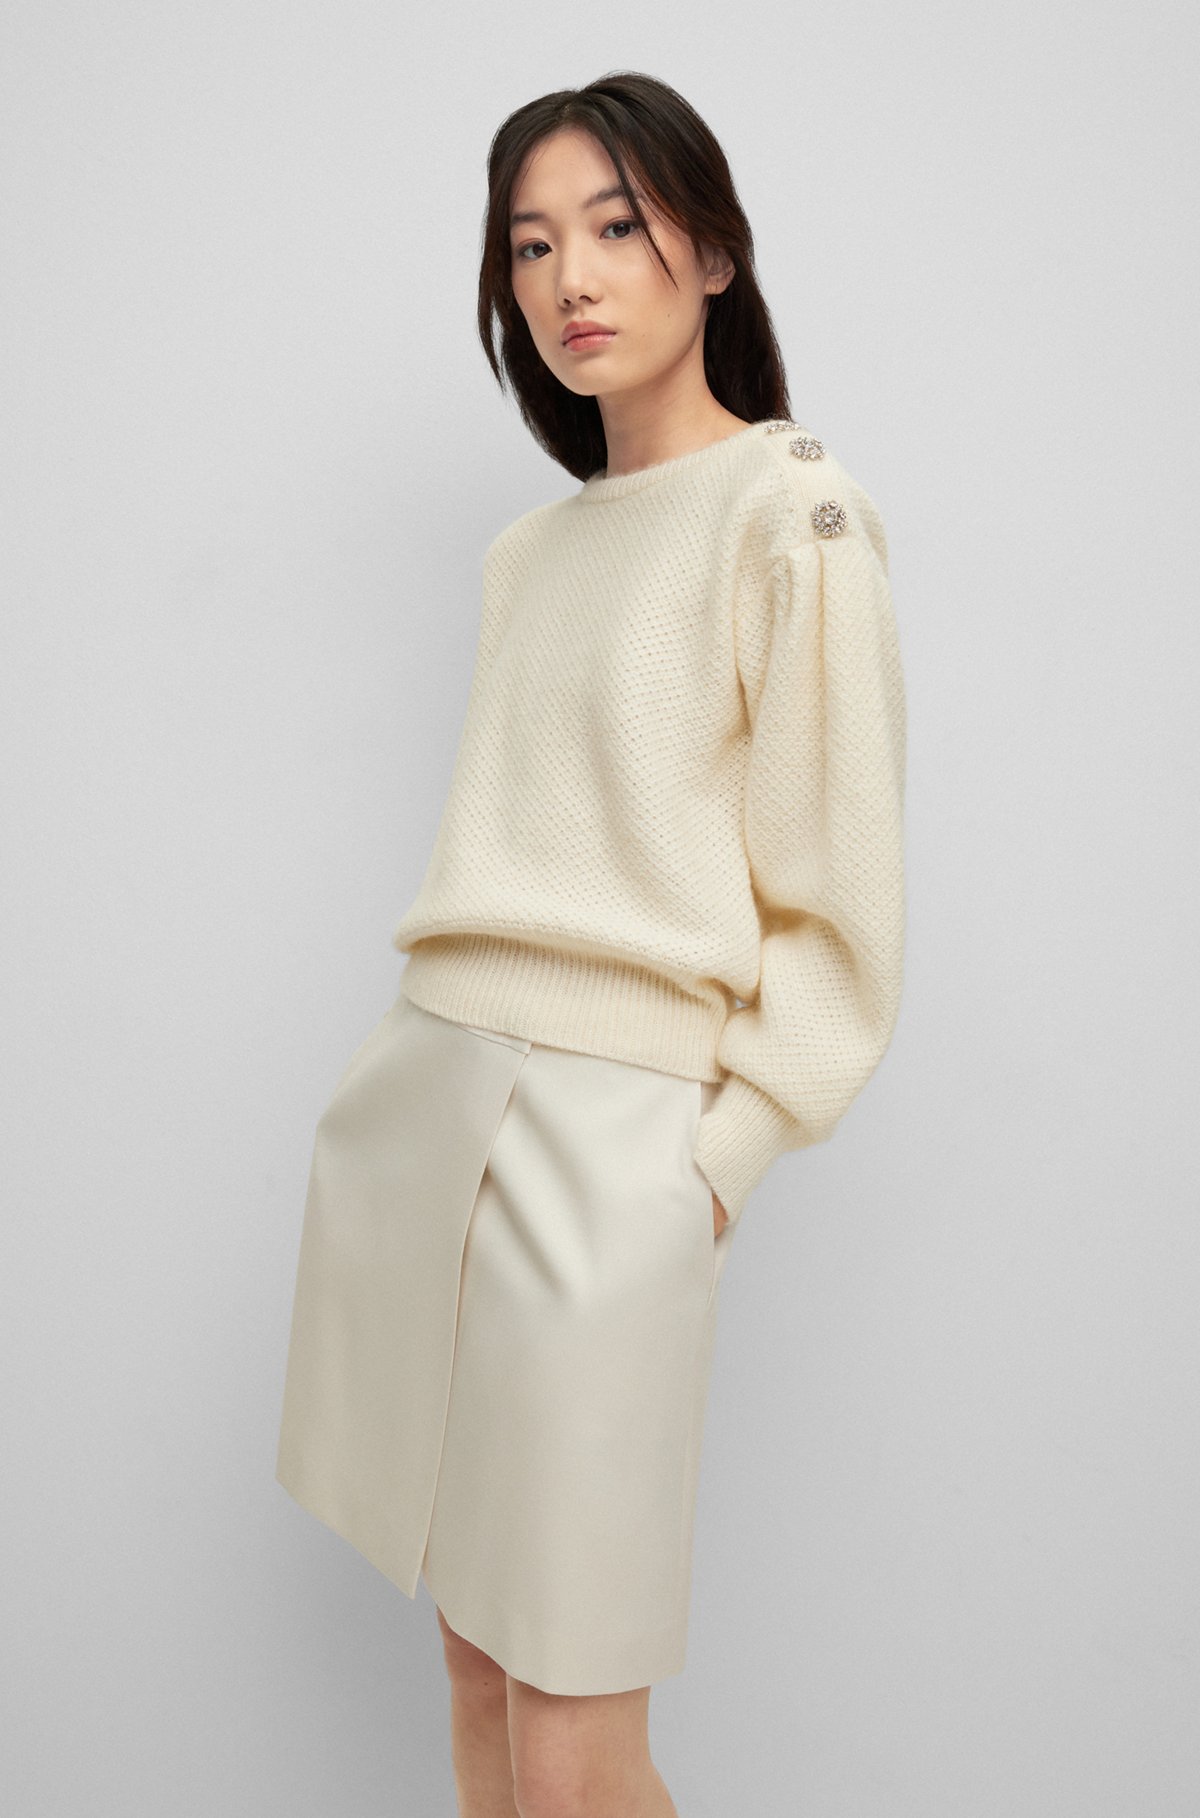 Wool-blend sweater with jeweled-button trim, White